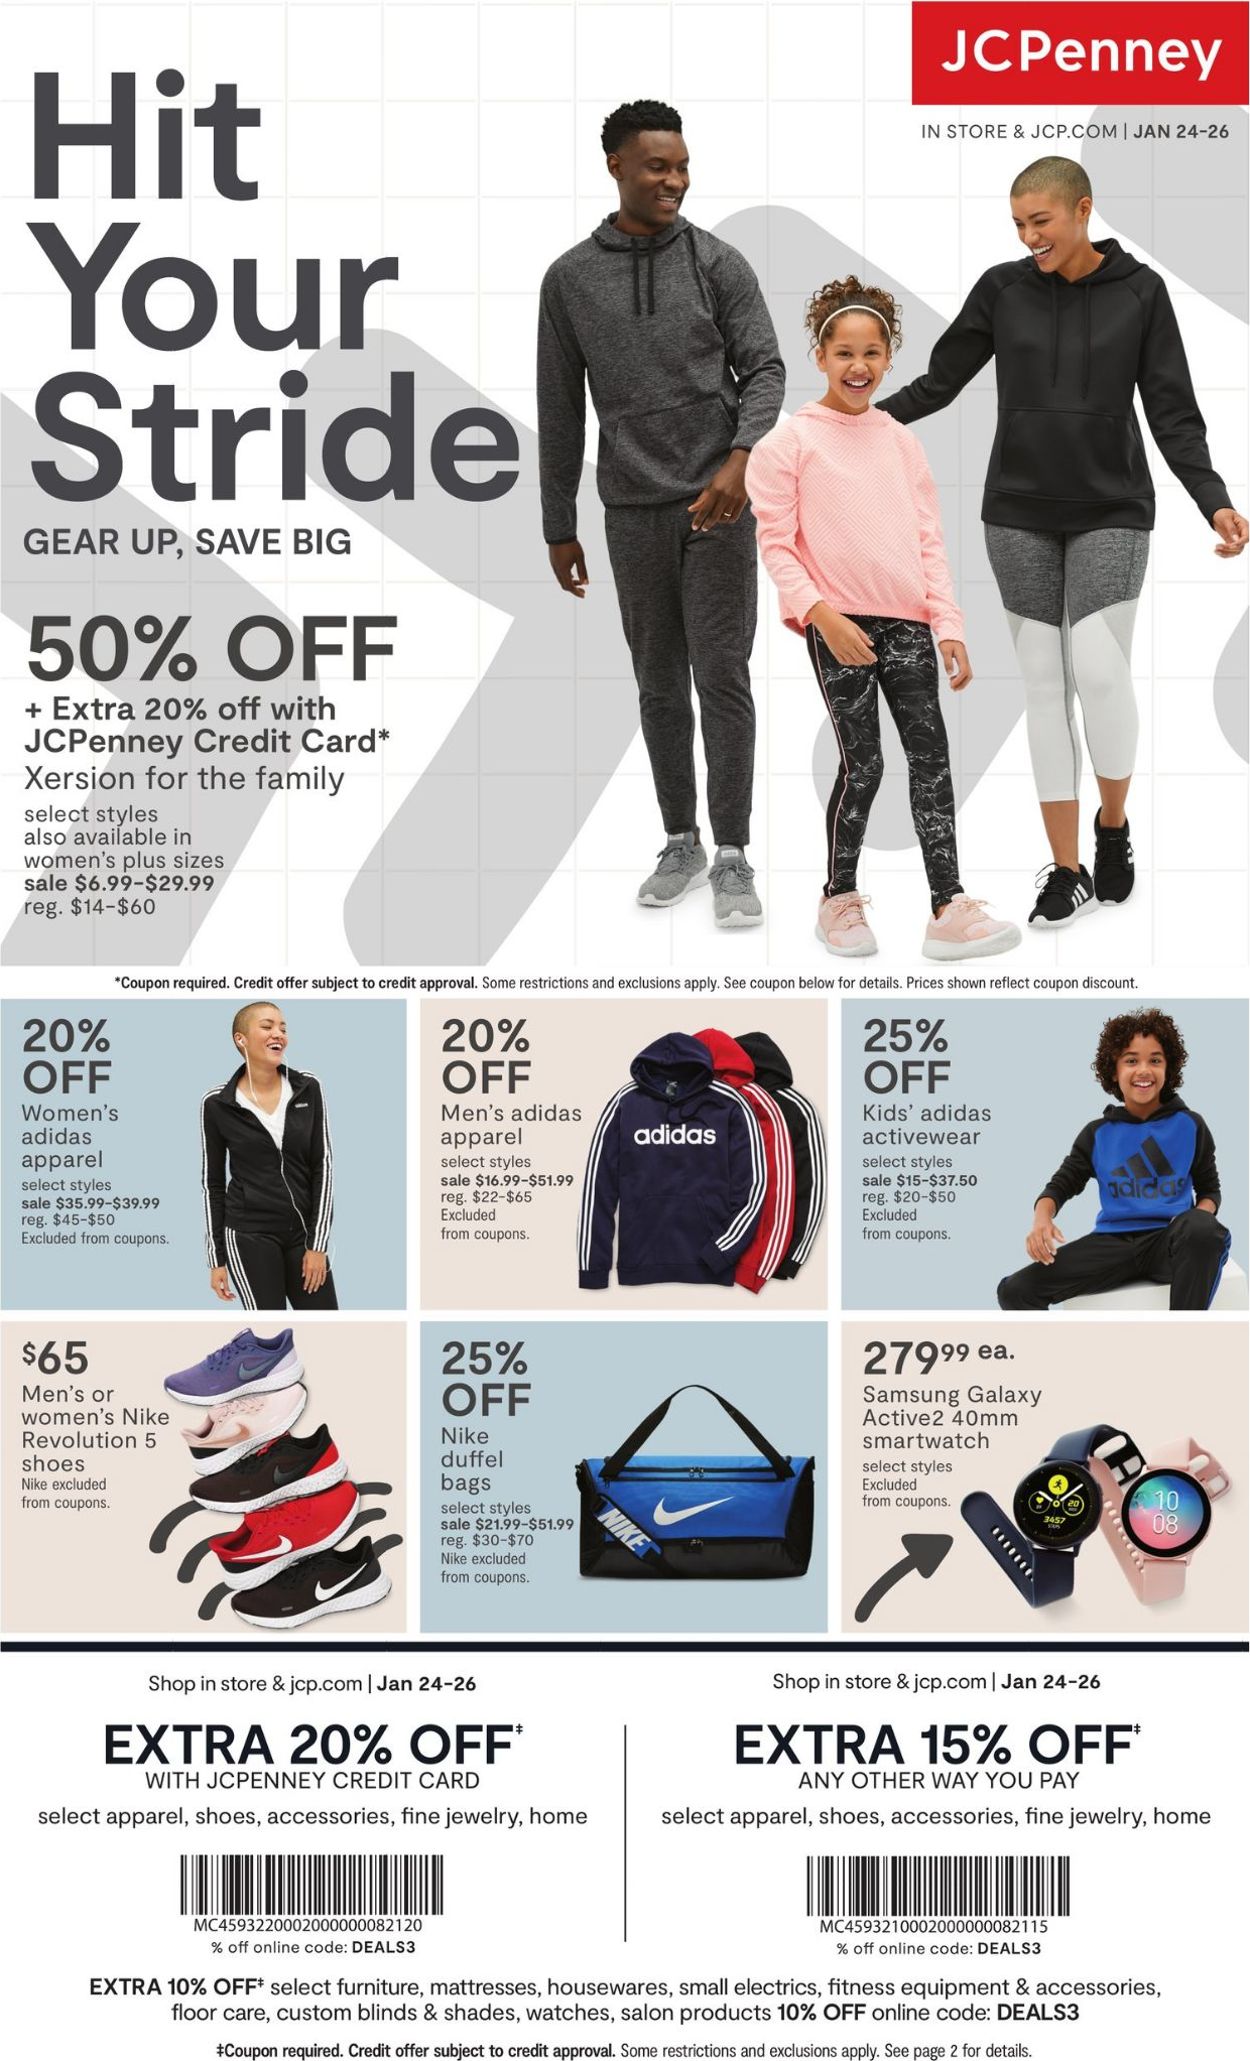 jcpenney adidas